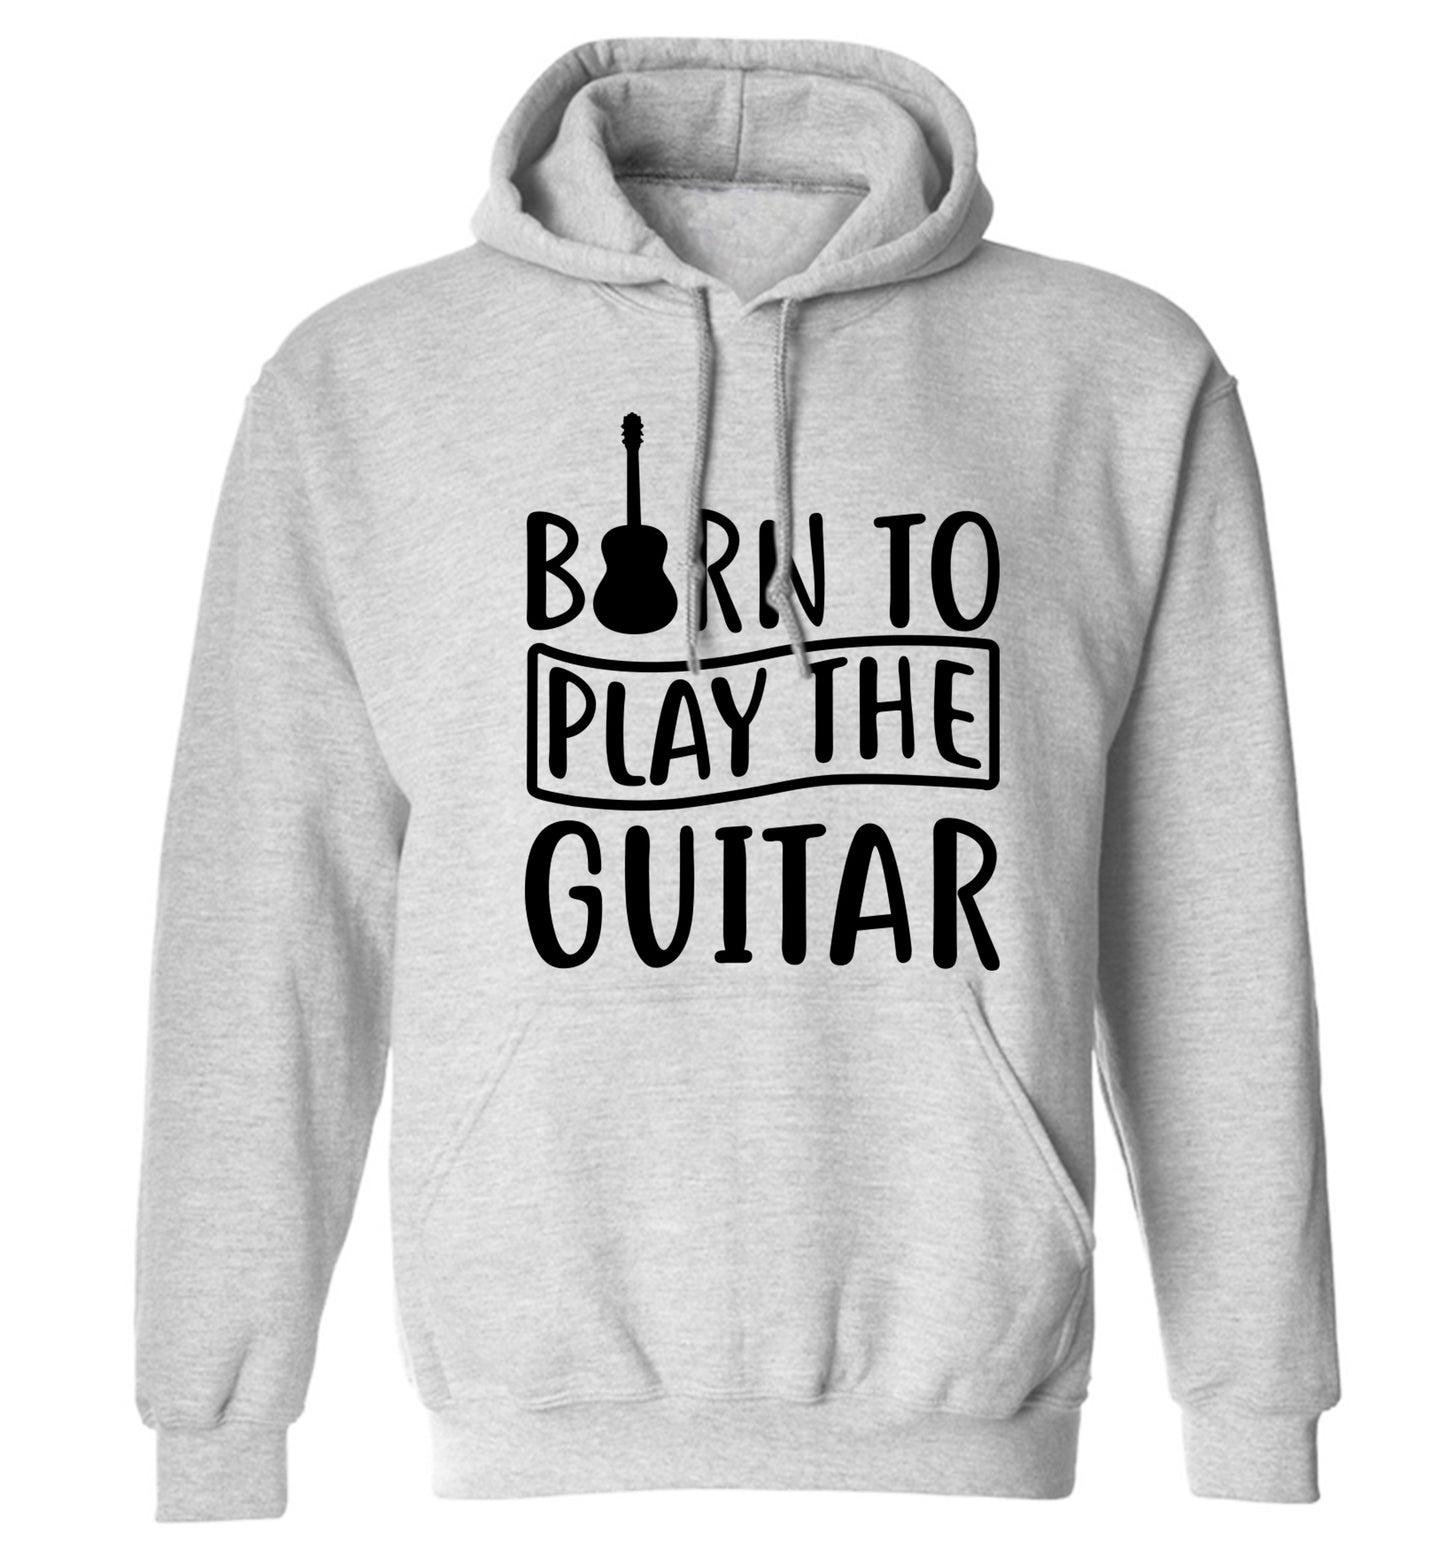 Born to play the guitar adults unisex grey hoodie 2XL